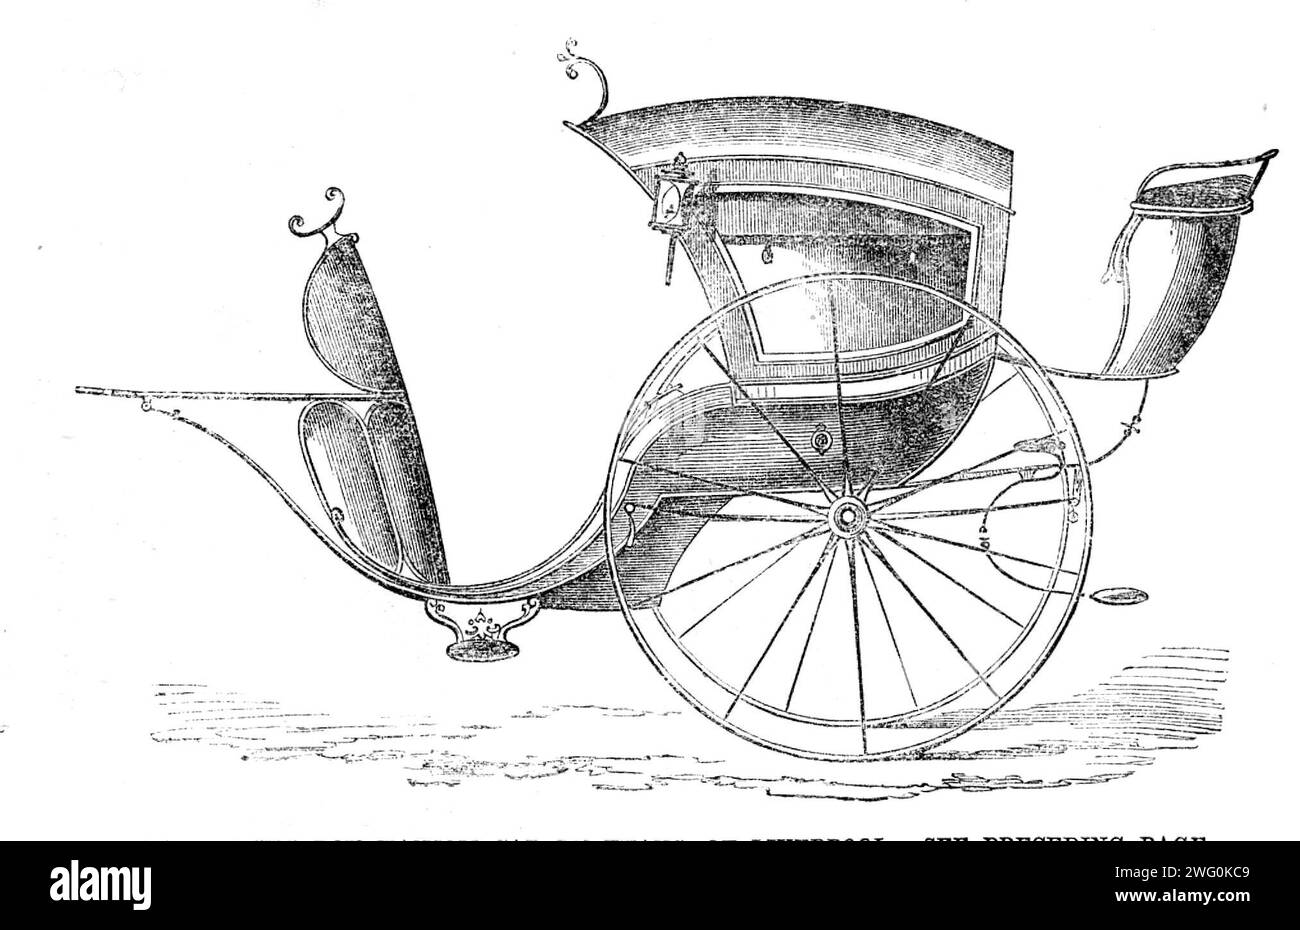 The International Exhibition: patent viceroy hansom cab by Evans, of Liverpool, 1862. 'Mr. James Evans, of Tarlton-street, Liverpool, has just introduced an improved patent cab, the patent of which consists in the application of metallic springs to the shafts near their junction with the front of the vehicle, thus securing a combined action which removes the unpleasant motion common to vehicles of the ordinary construction. Uneven roads produce no effect on the patent cab, as, by means of the patent springs and joint, an equal balance is preserved between the vehicle and the shafts under all c Stock Photo